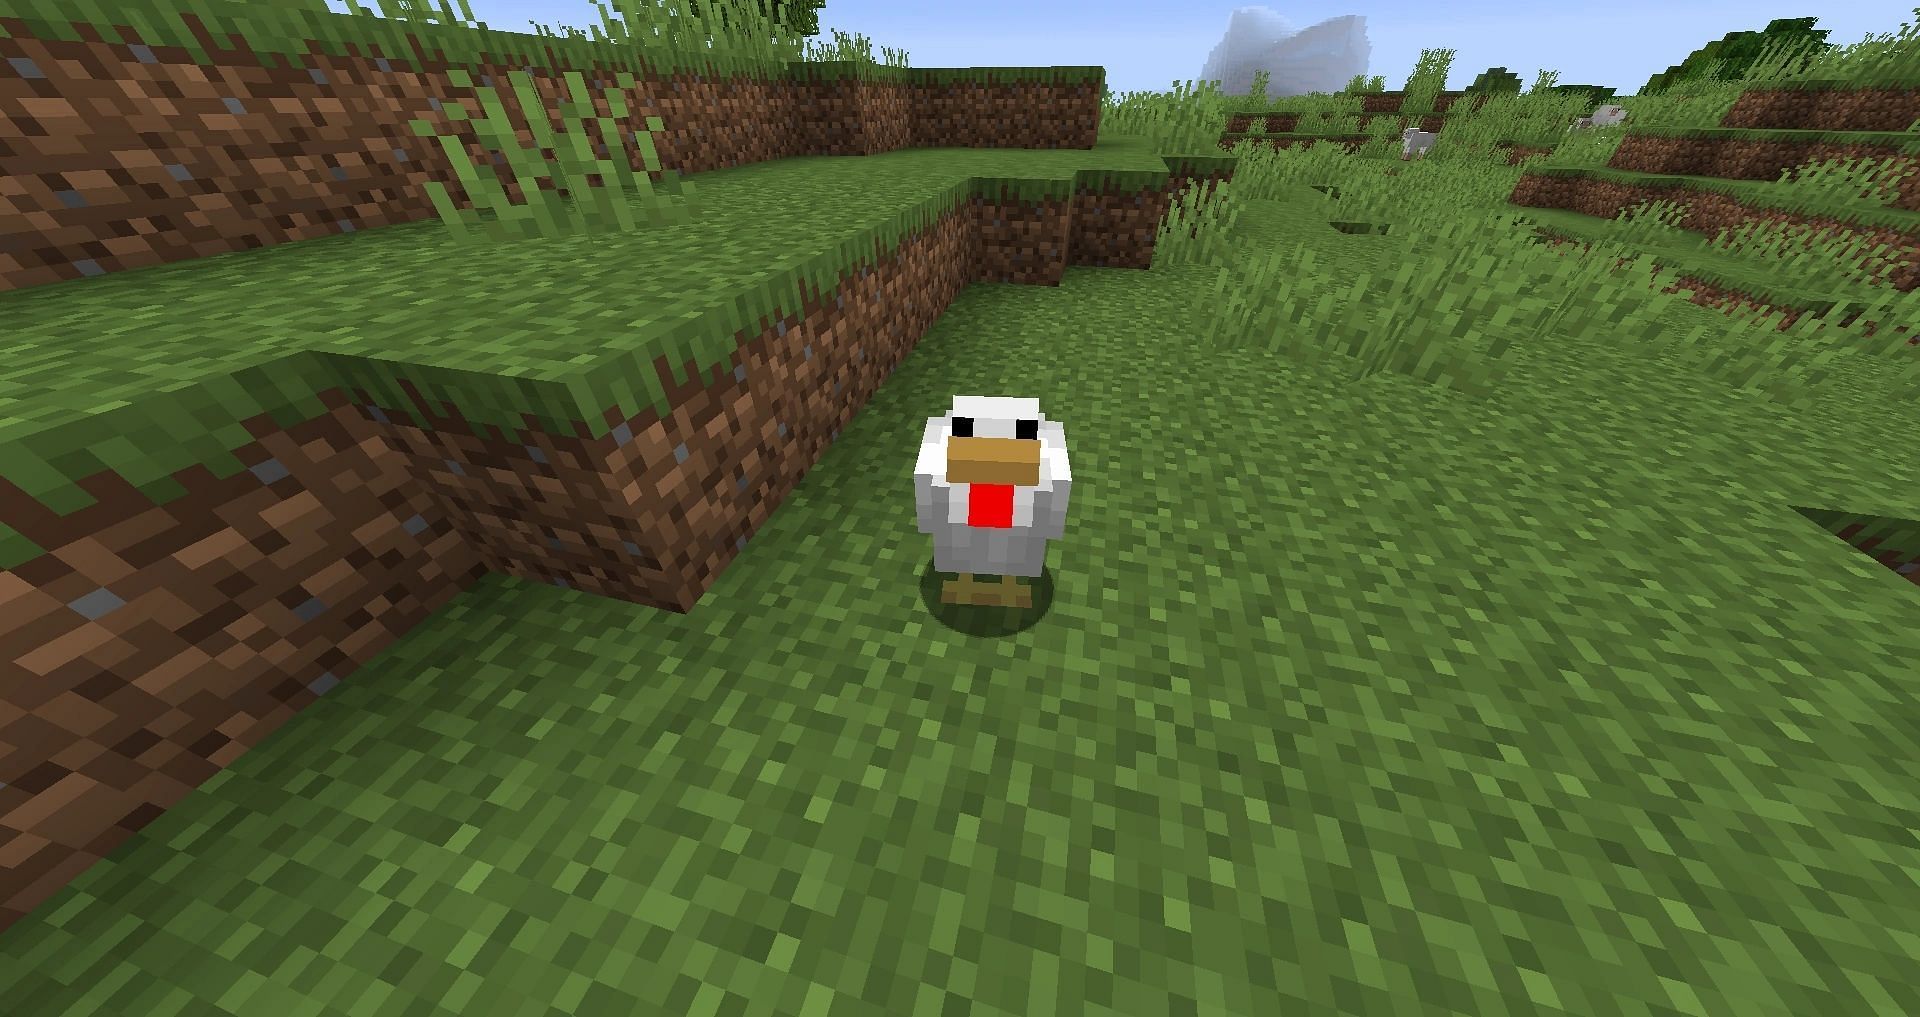 Chickens can be farmed for feathers and eggs in Minecraft (Image via Mojang)